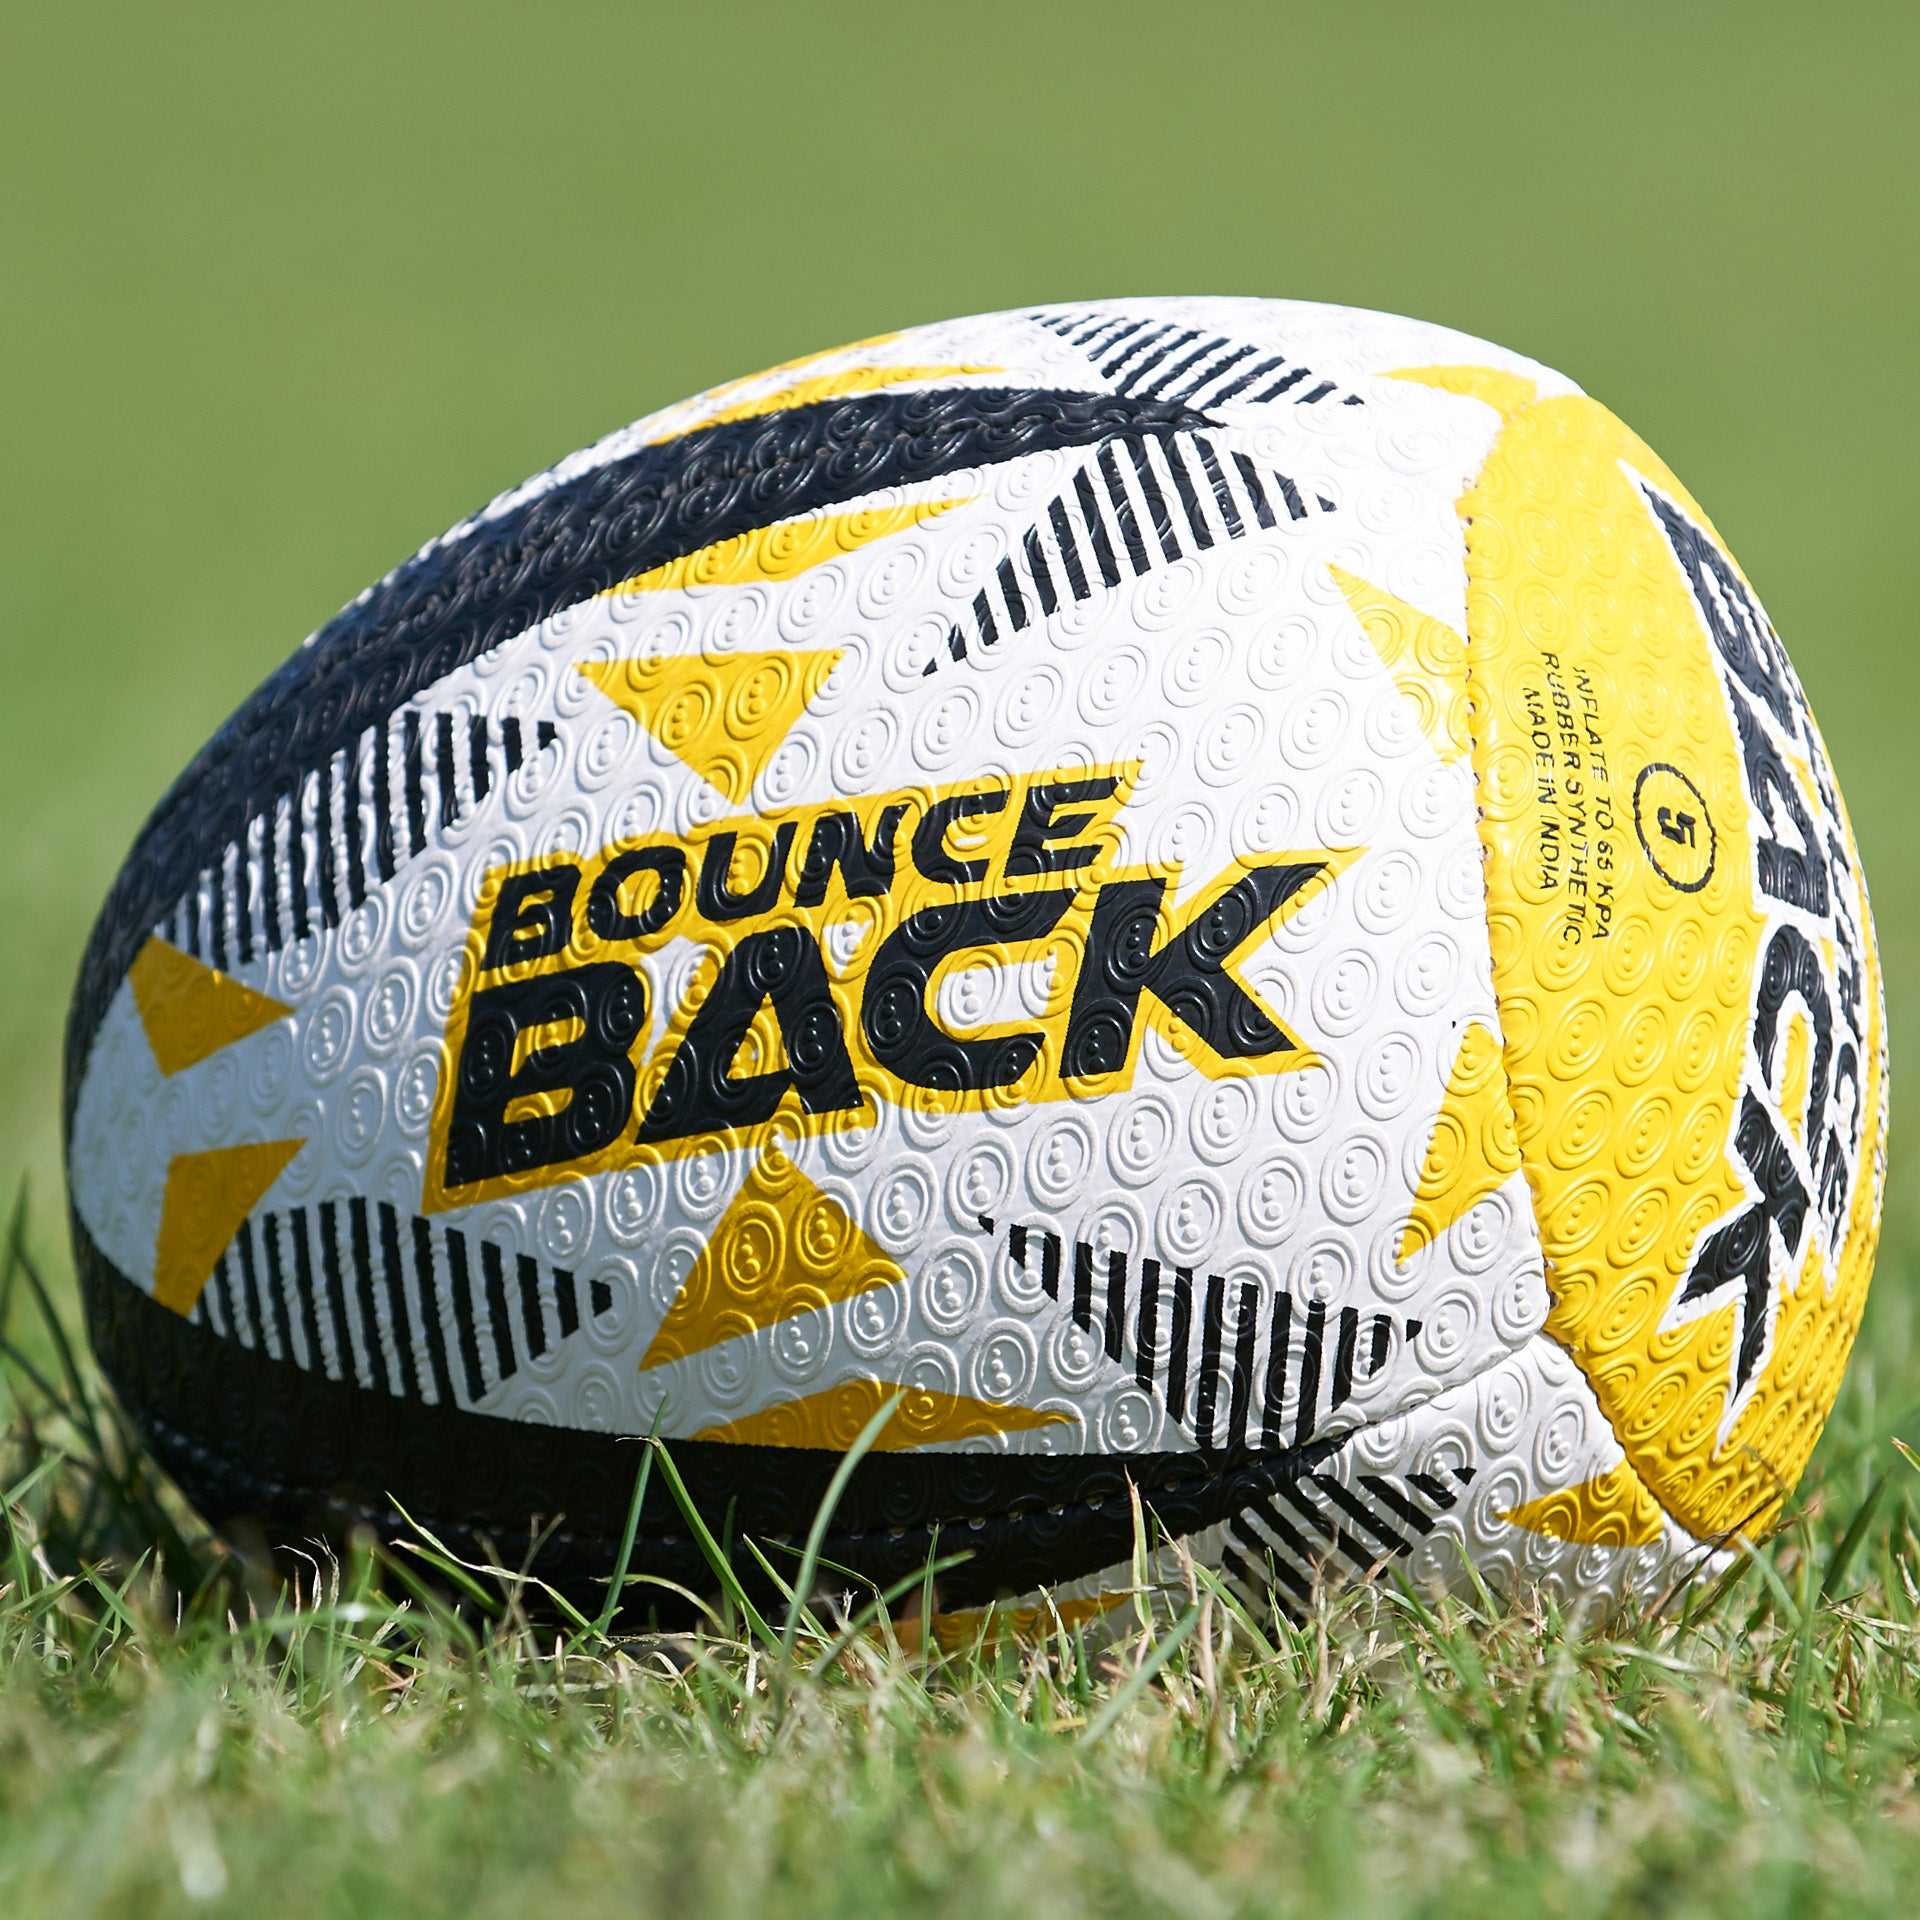 Rugby Bounce Back Solo Skills Ball Football Sports Practice - Optimum